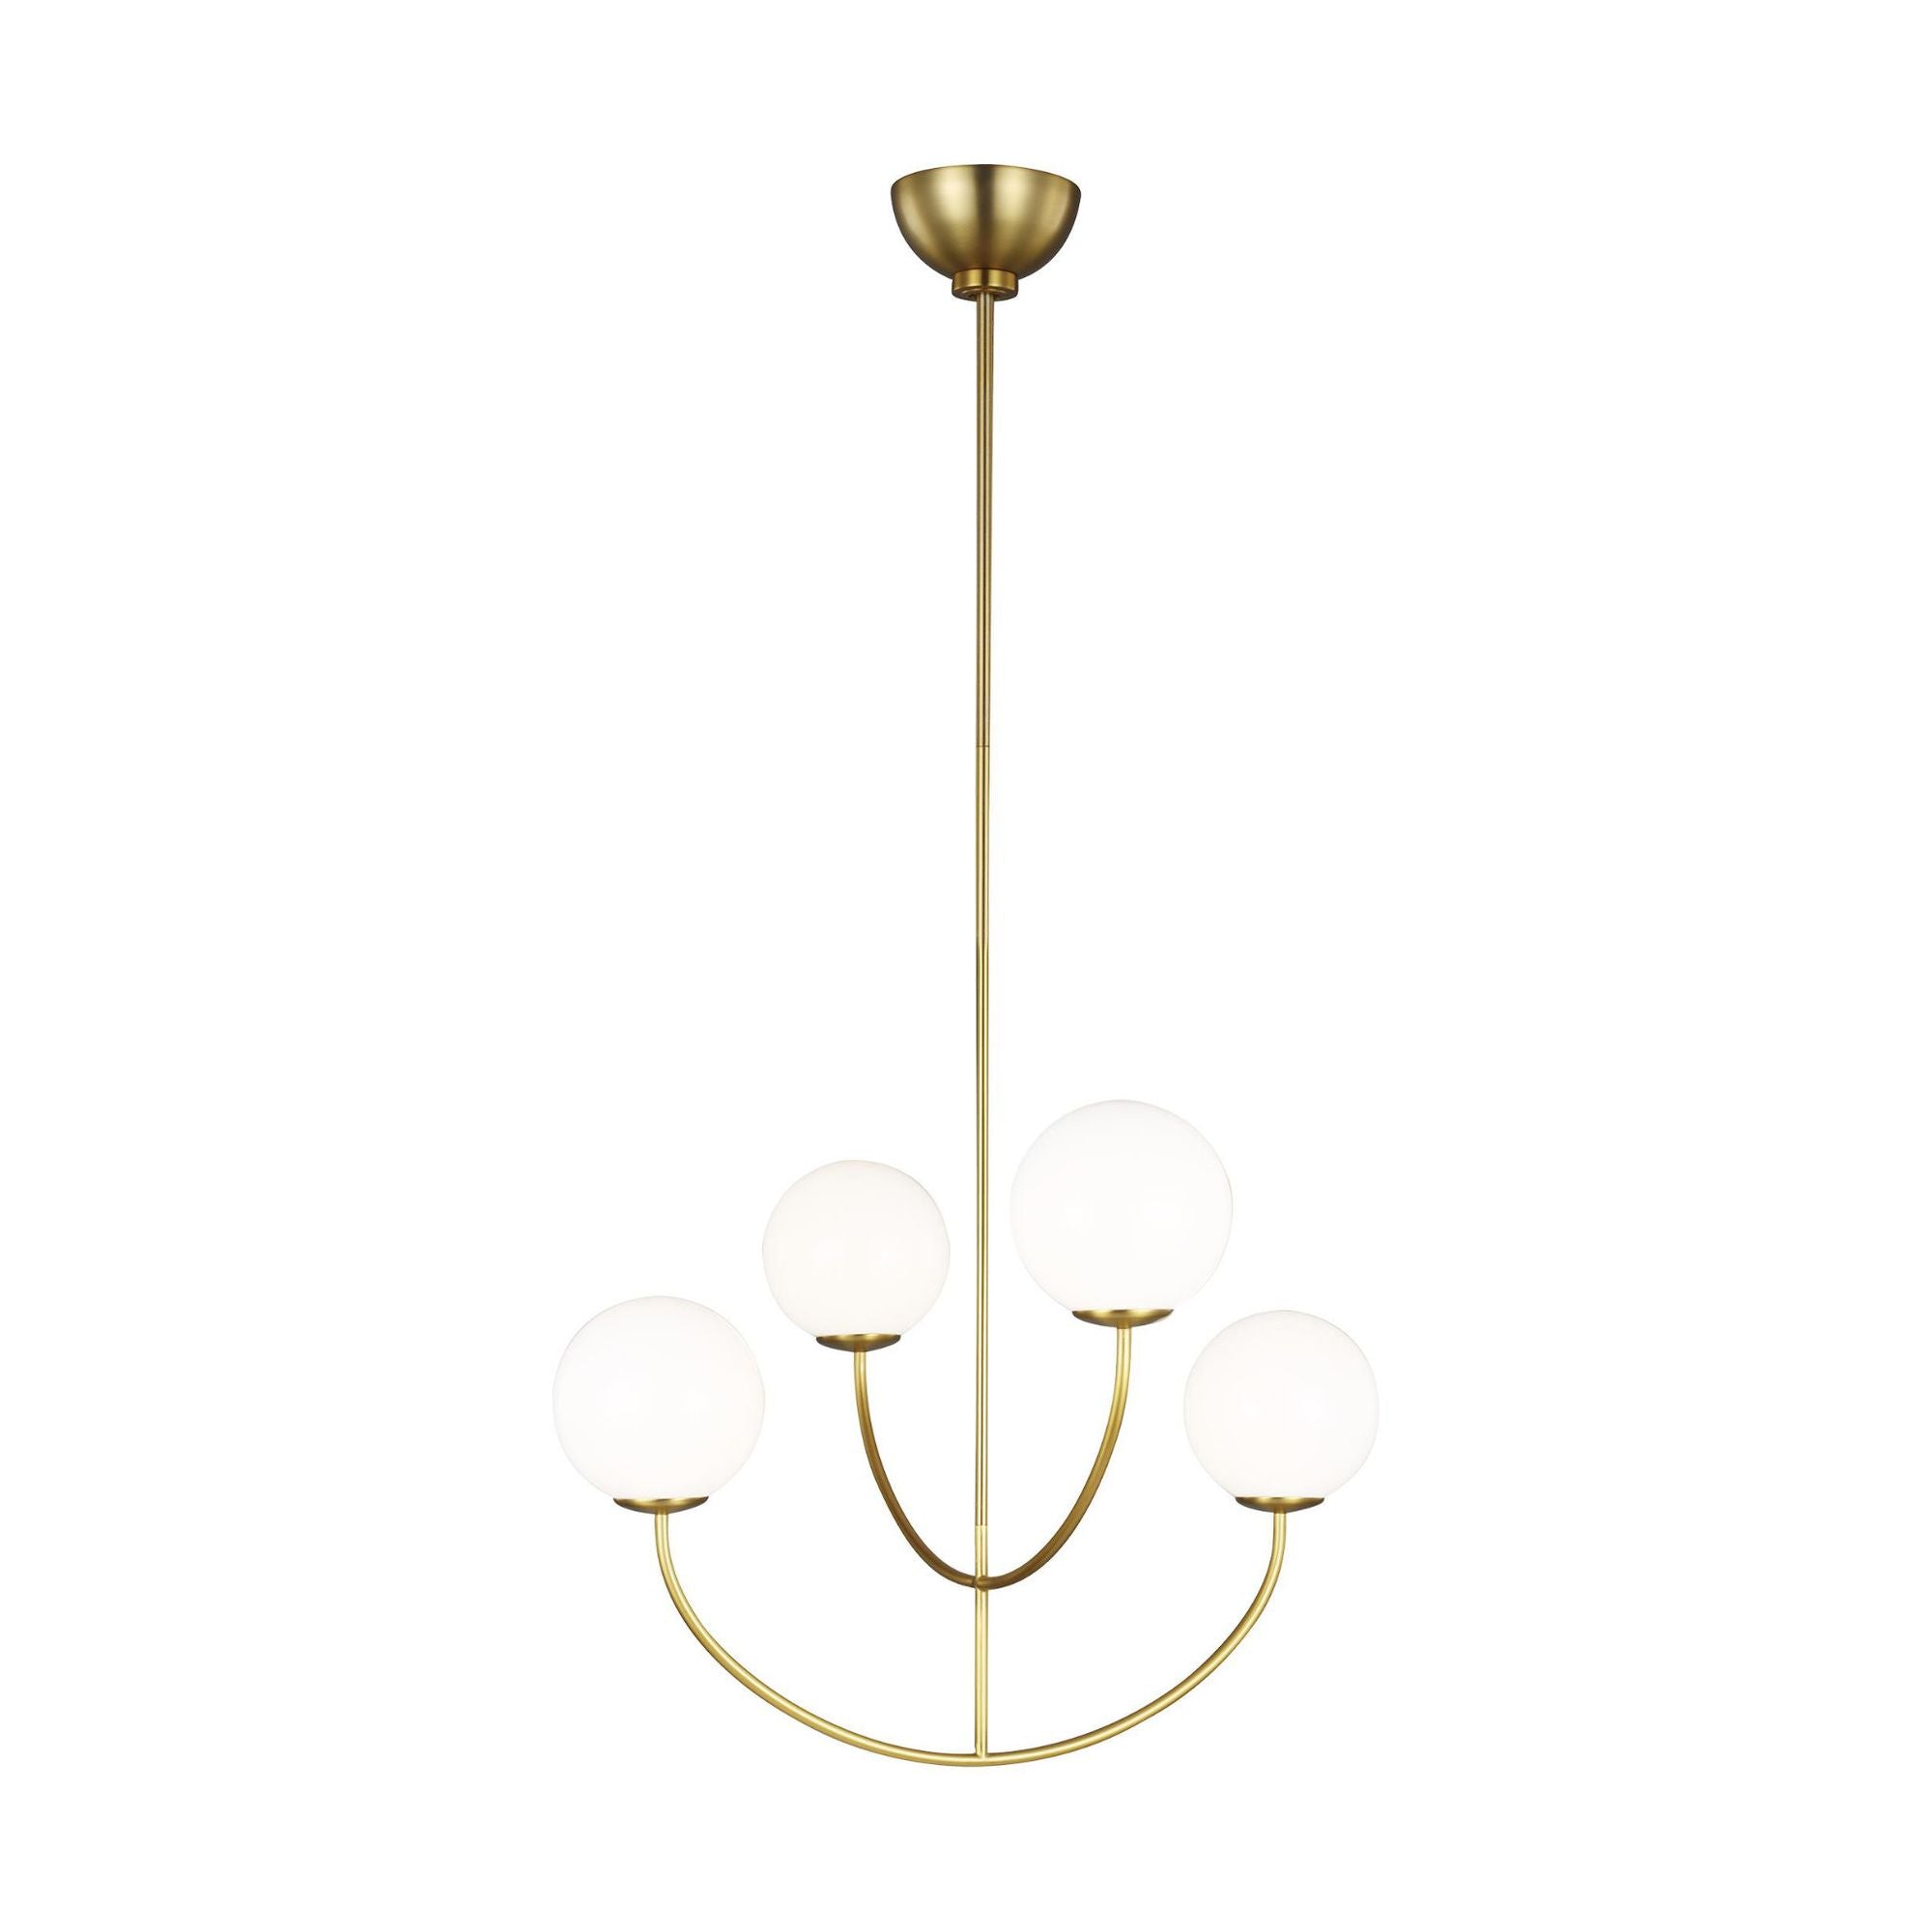 AERIN Galassia Four Light Chandelier in Burnished Brass